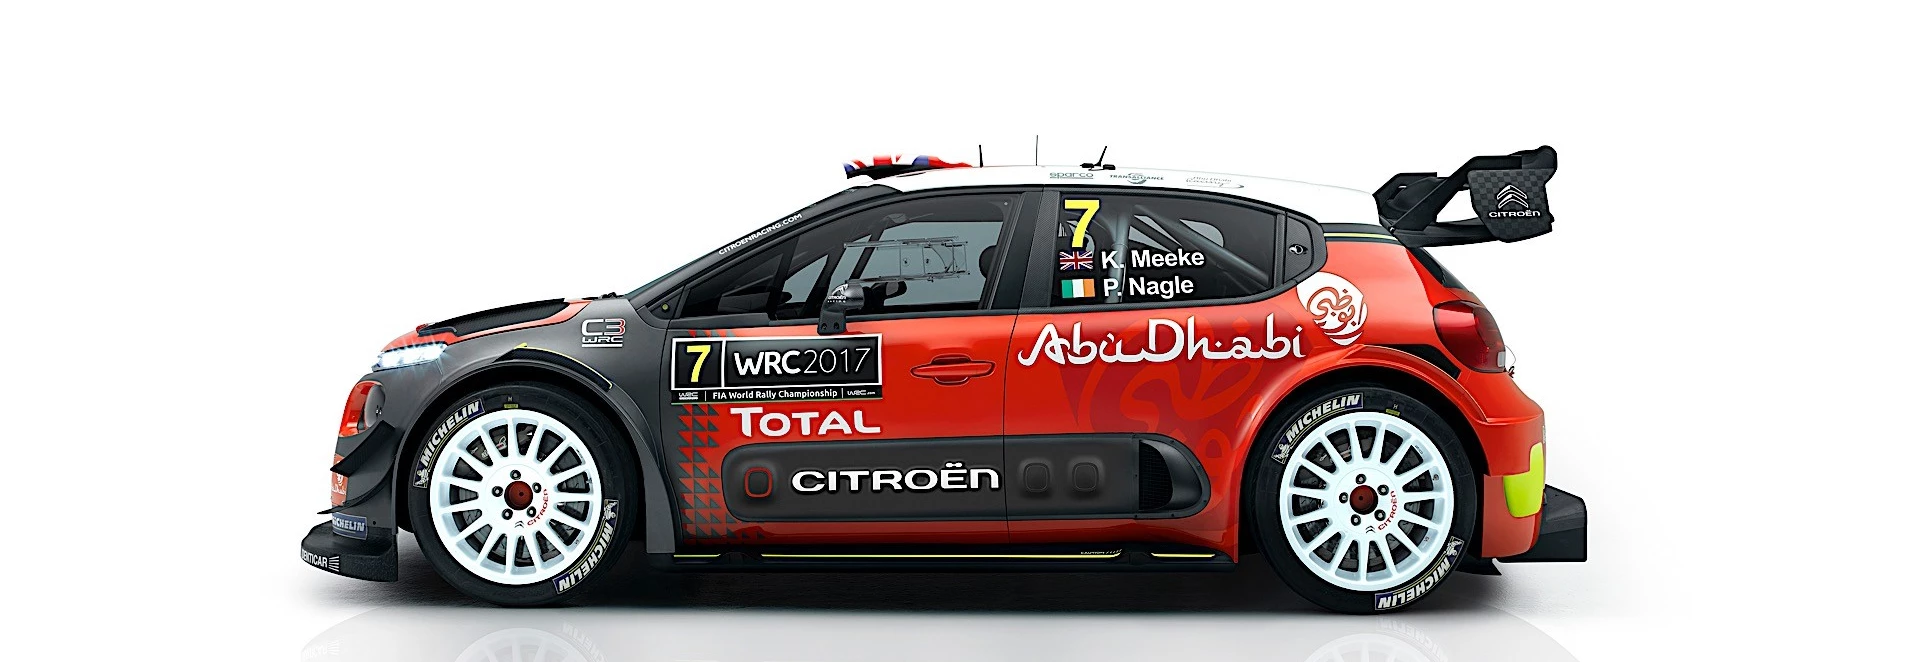 Will there be a hot hatch Citroen C3